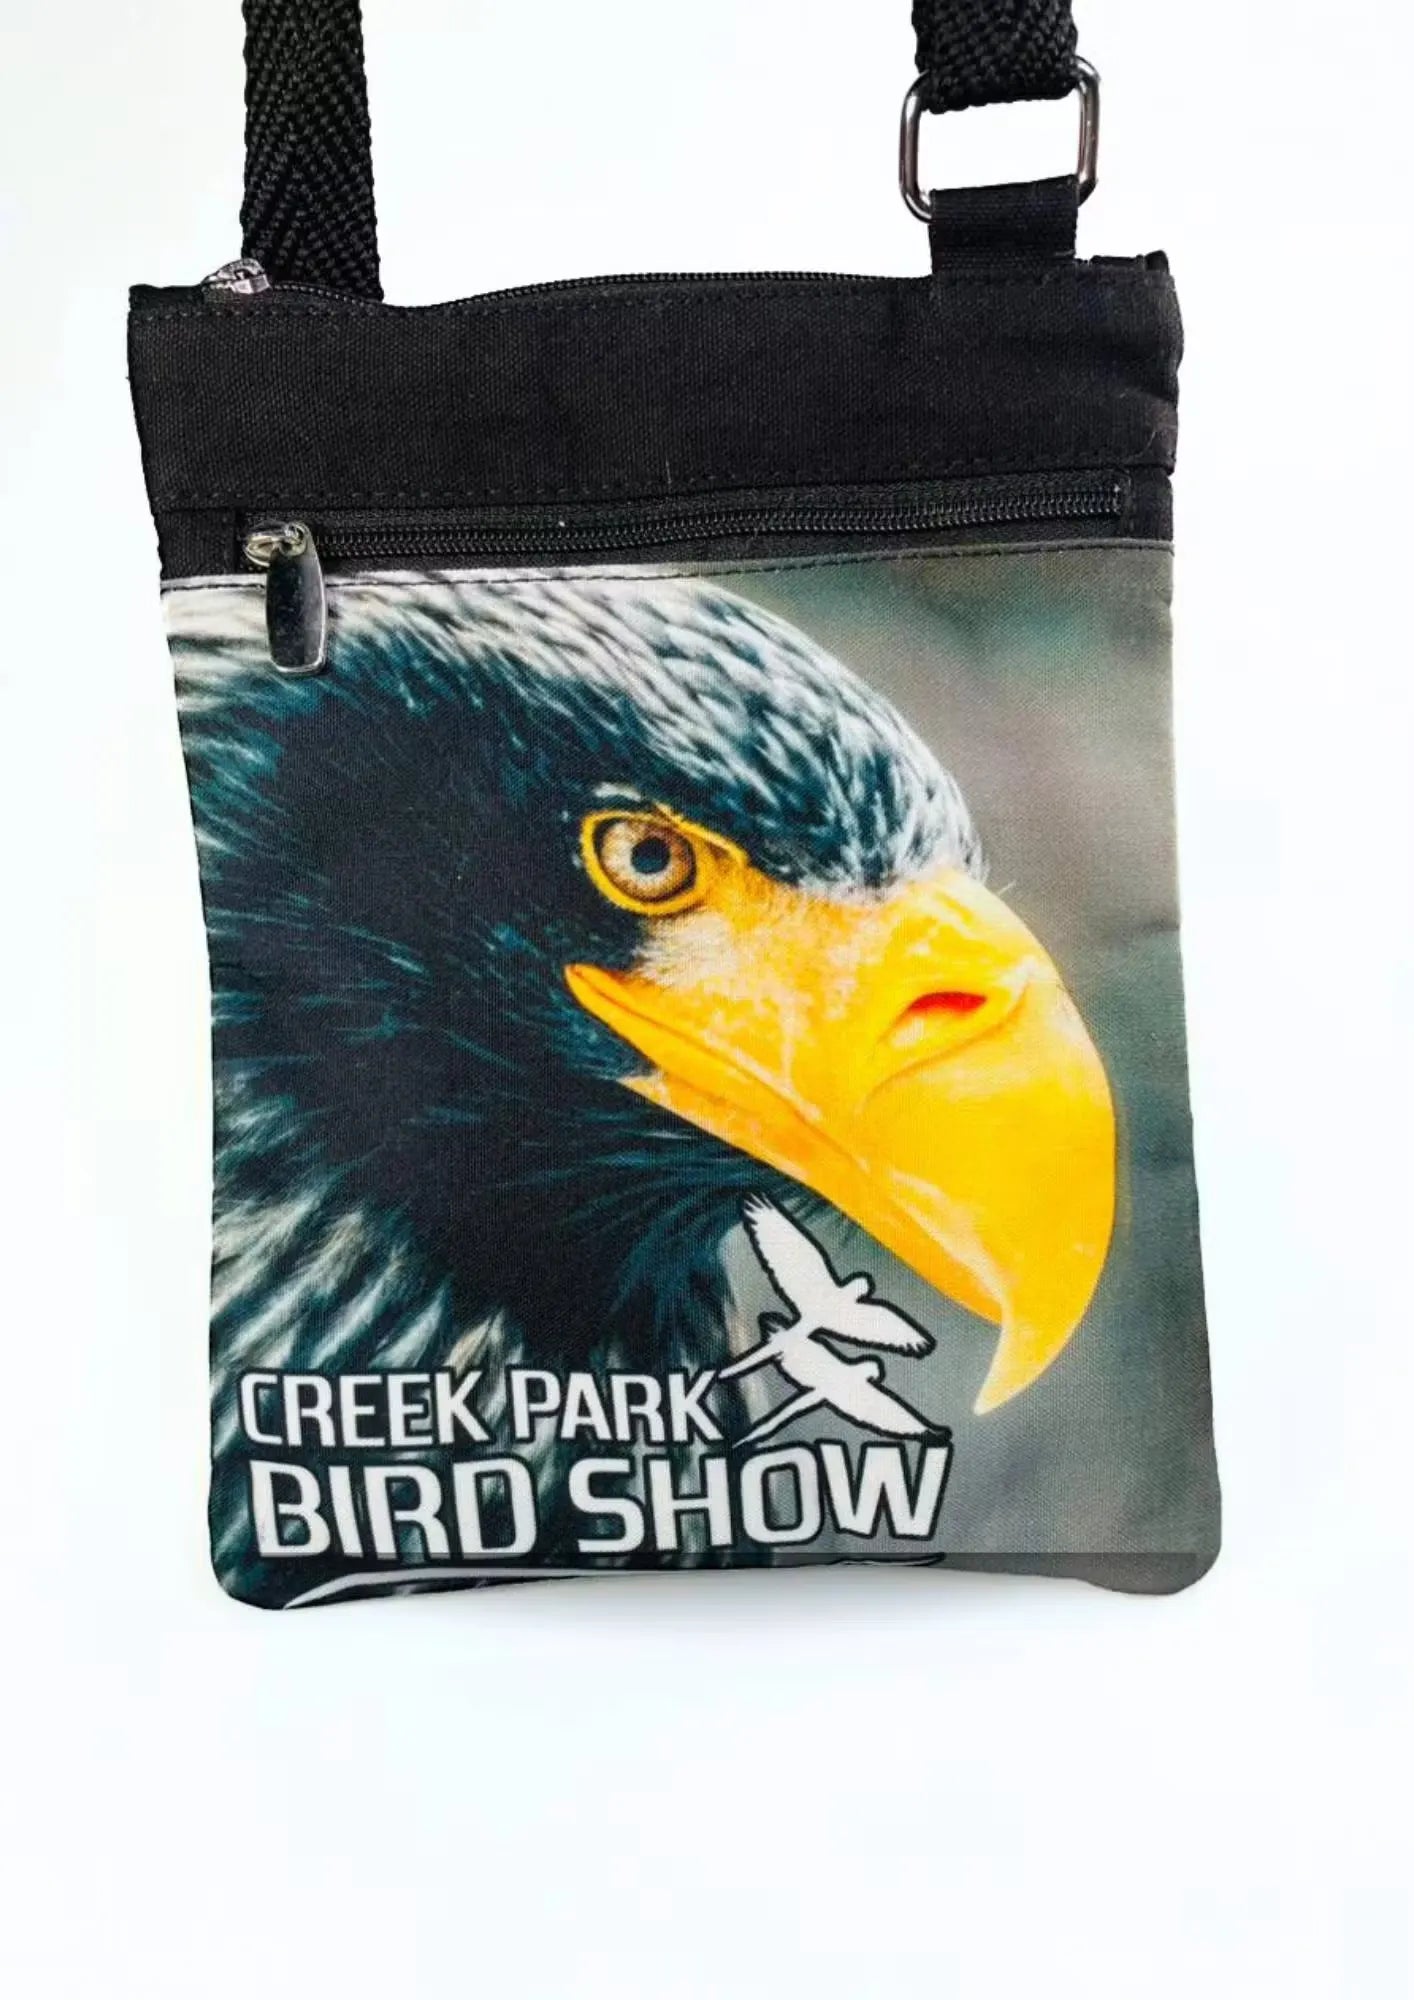 A stylish Creek Park Bird Show side bag with a black exterior and  cloths straps. The bag has multiple compartments and pockets for storing essentials.